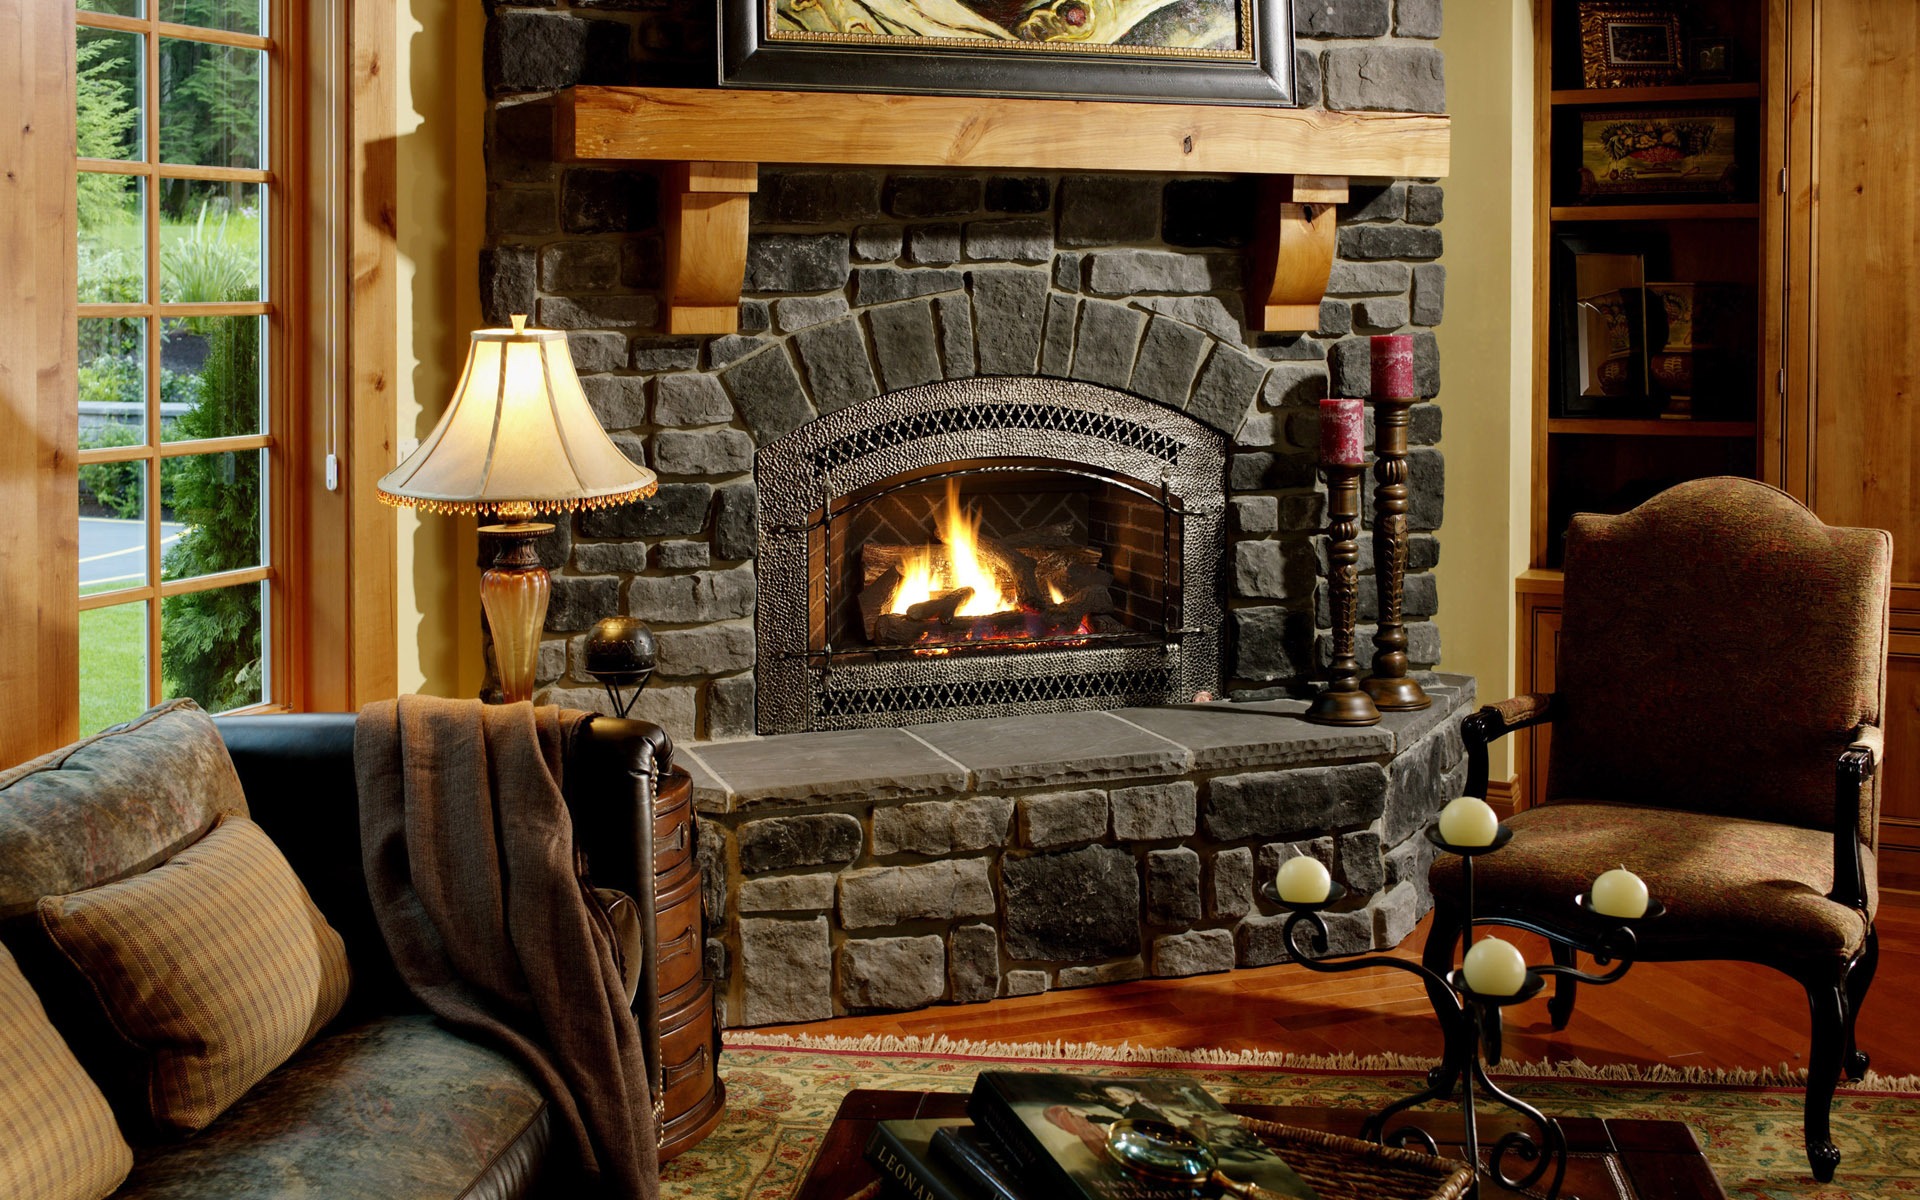 Western-style family fireplace wallpaper (1) #19 - 1920x1200